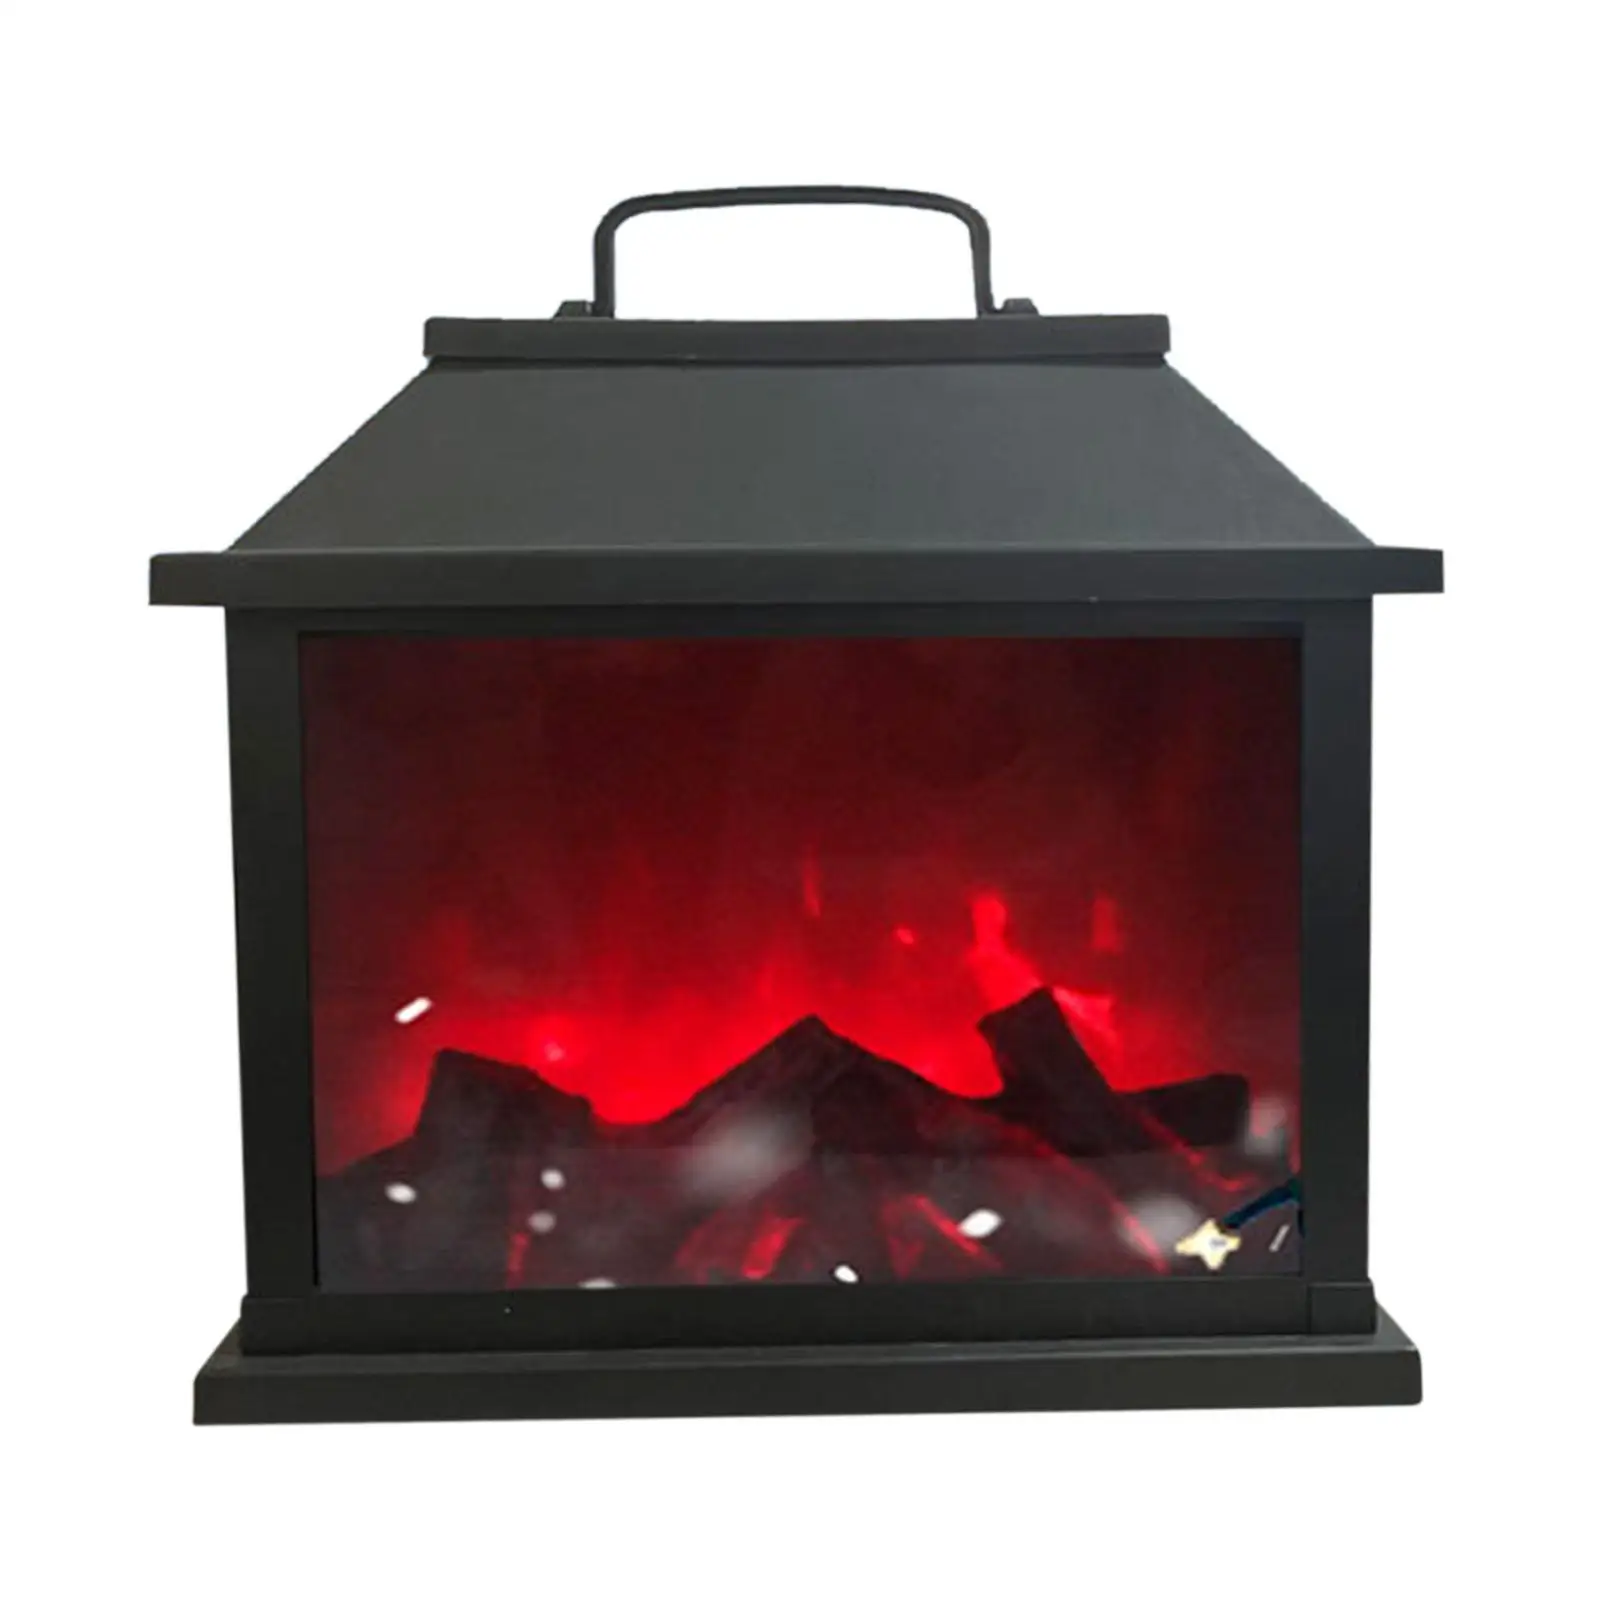 Fireplace Lantern Flame Effect Lighting Artificial LED Fire Lamp Vintage Style Flameless Tabletop Lamp for Fall and Winter Decor